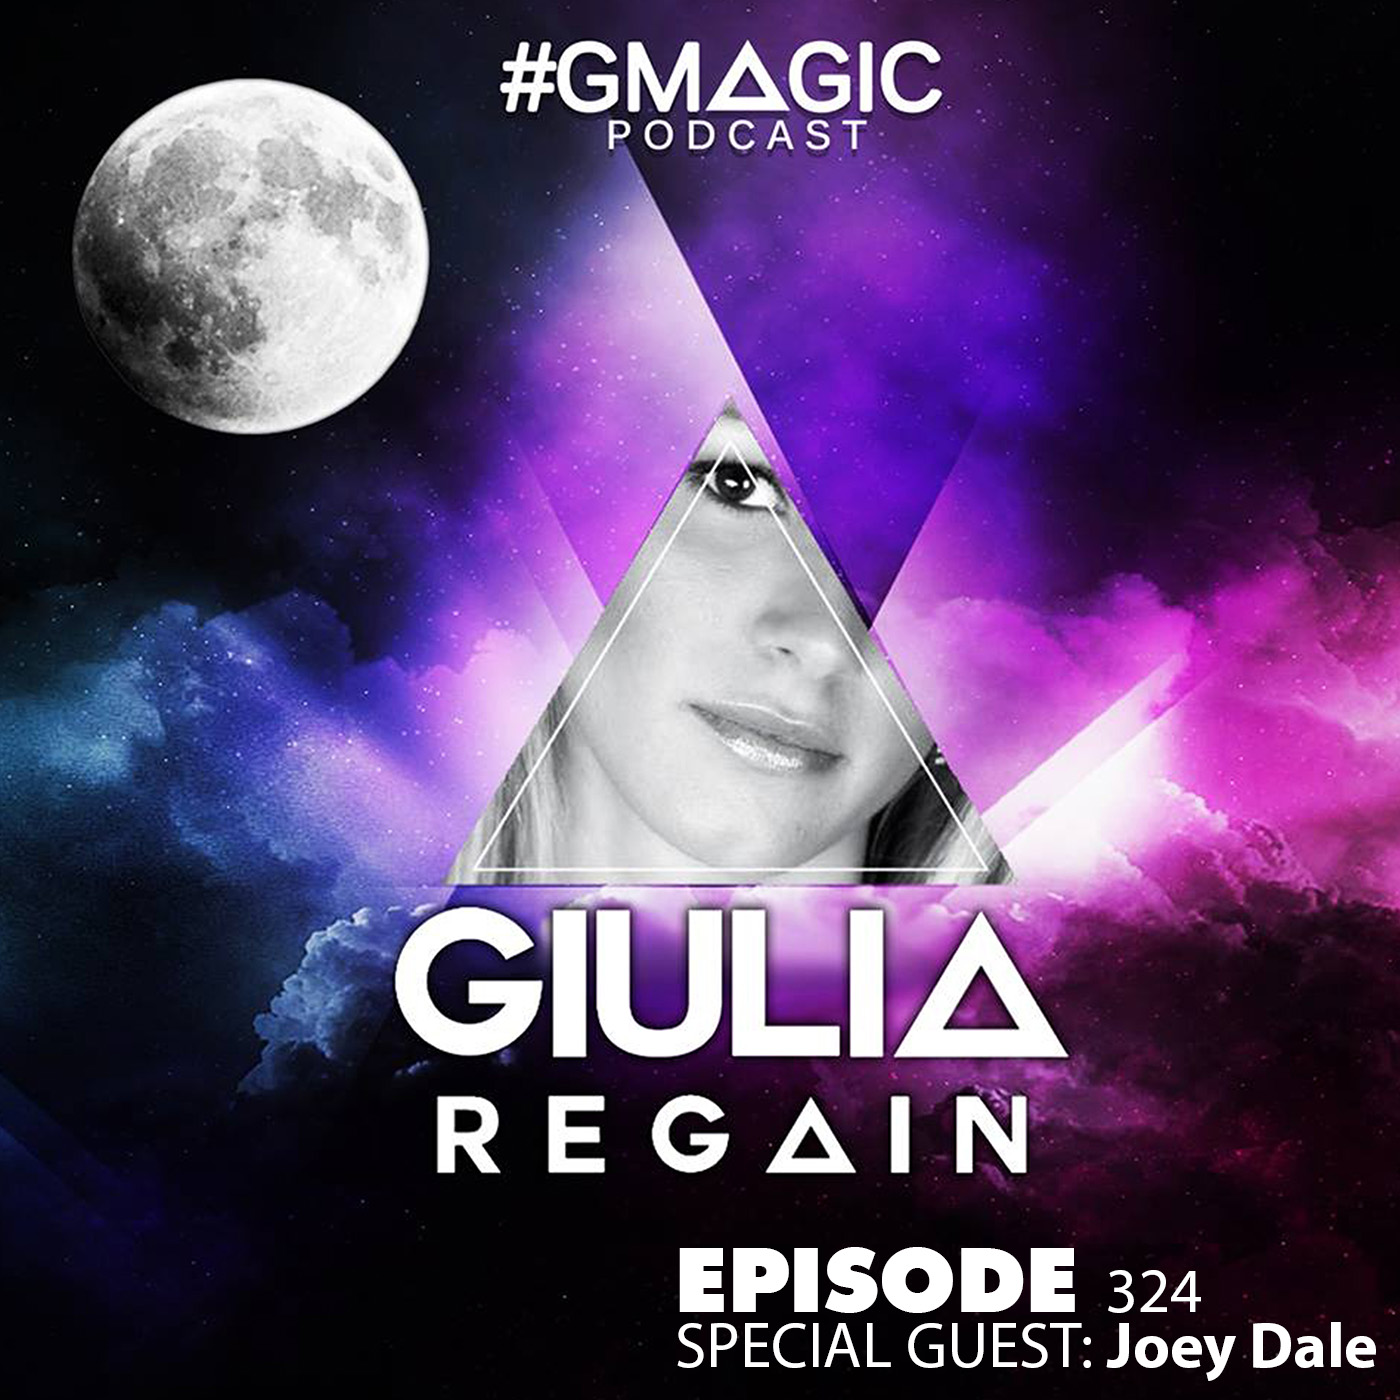 #Gmagic Podcast 324 - Special Guest: Joey Dale